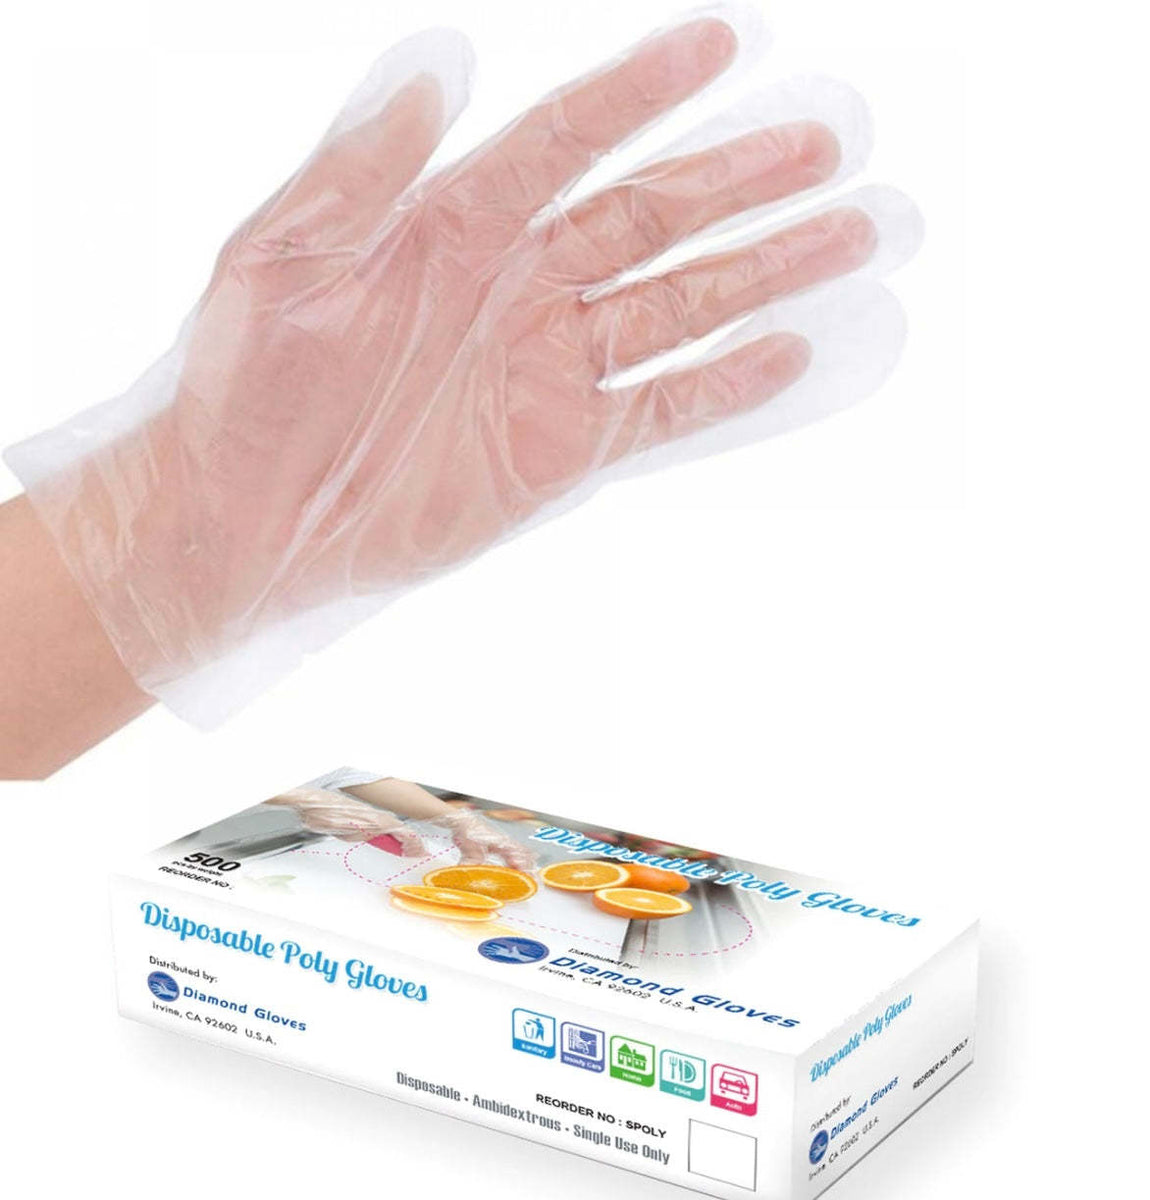 1 box of Poly Gloves, when worn in the hand.